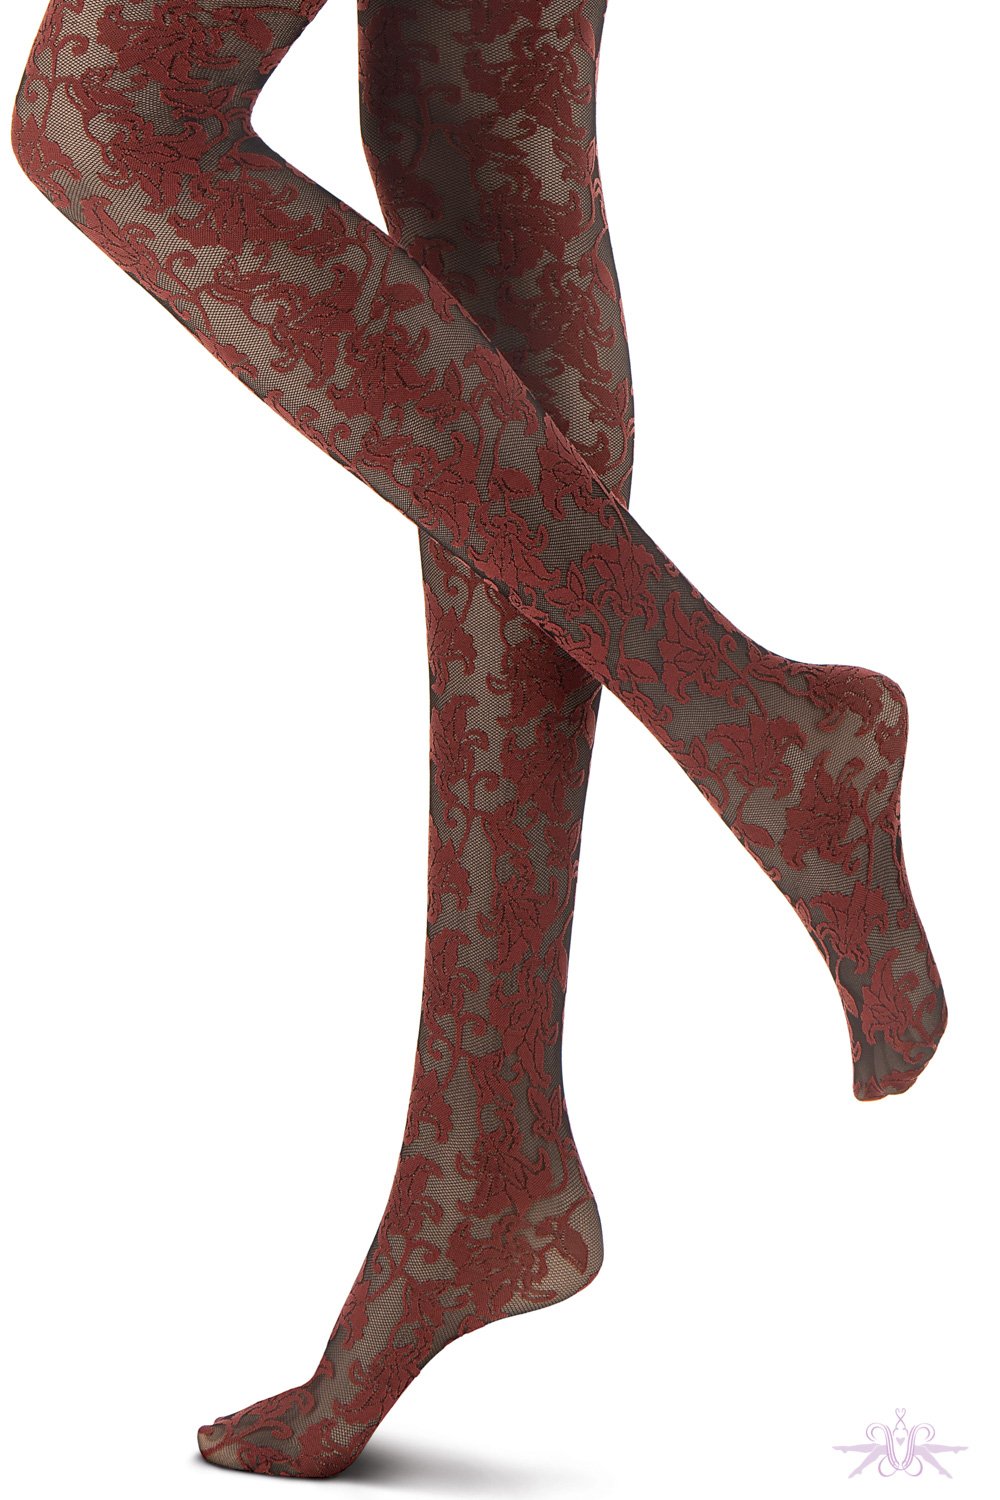 Oroblu Bicolour Lace Tights Fashion Tights for Autumn at the Hosiery Box -  The Hosiery Box